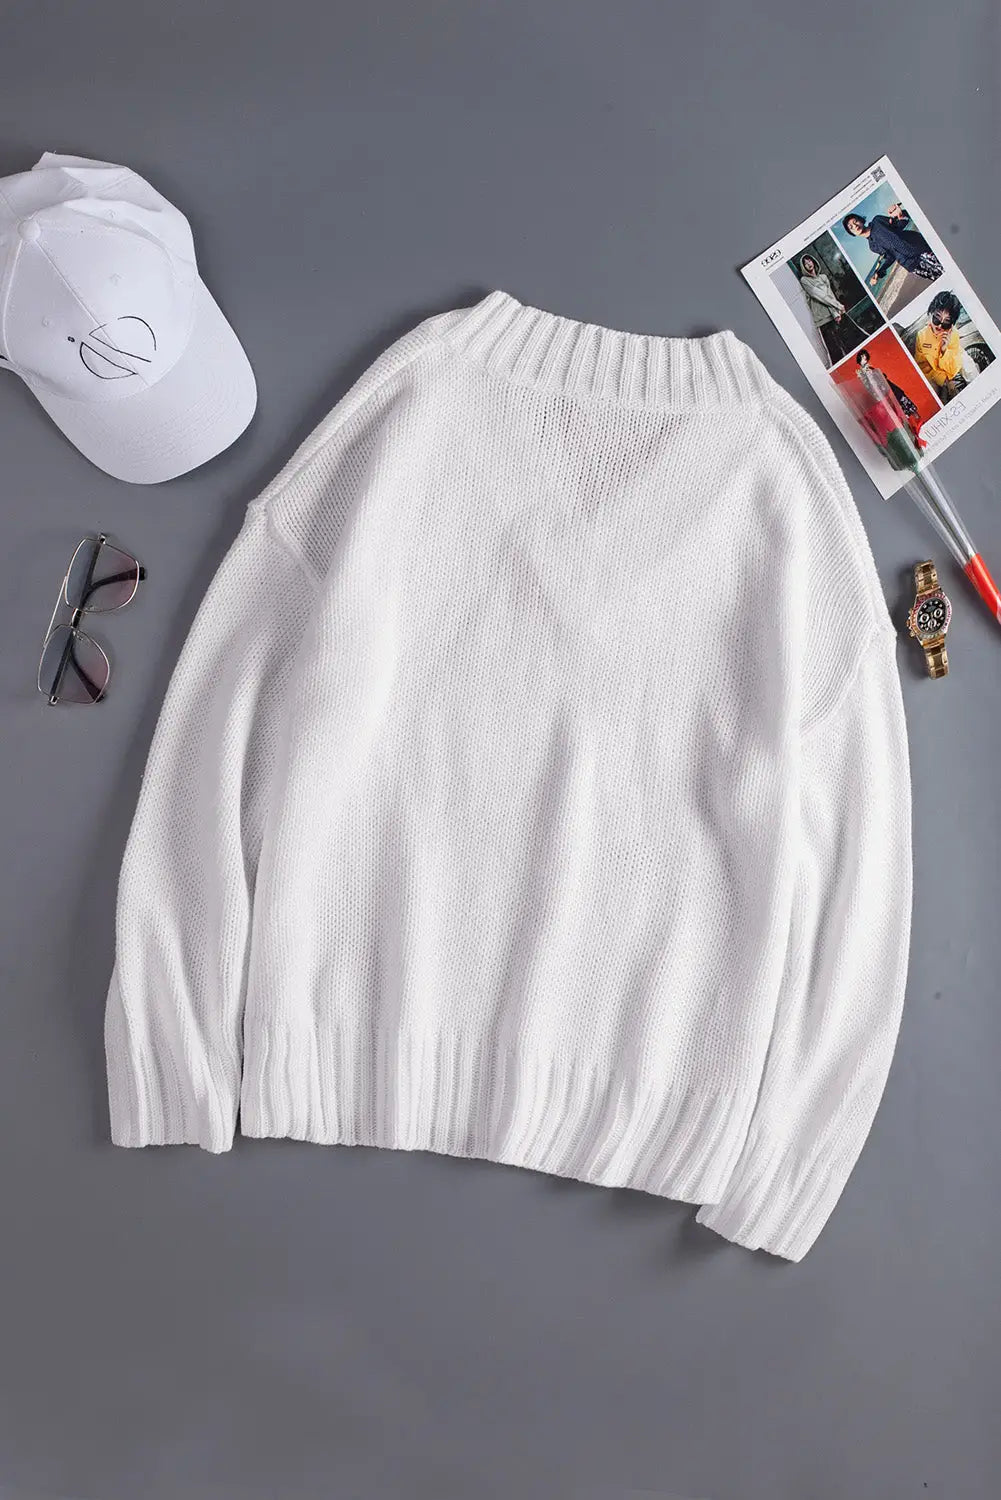 White v neck drop shoulder knitted sweater - sweaters & cardigans